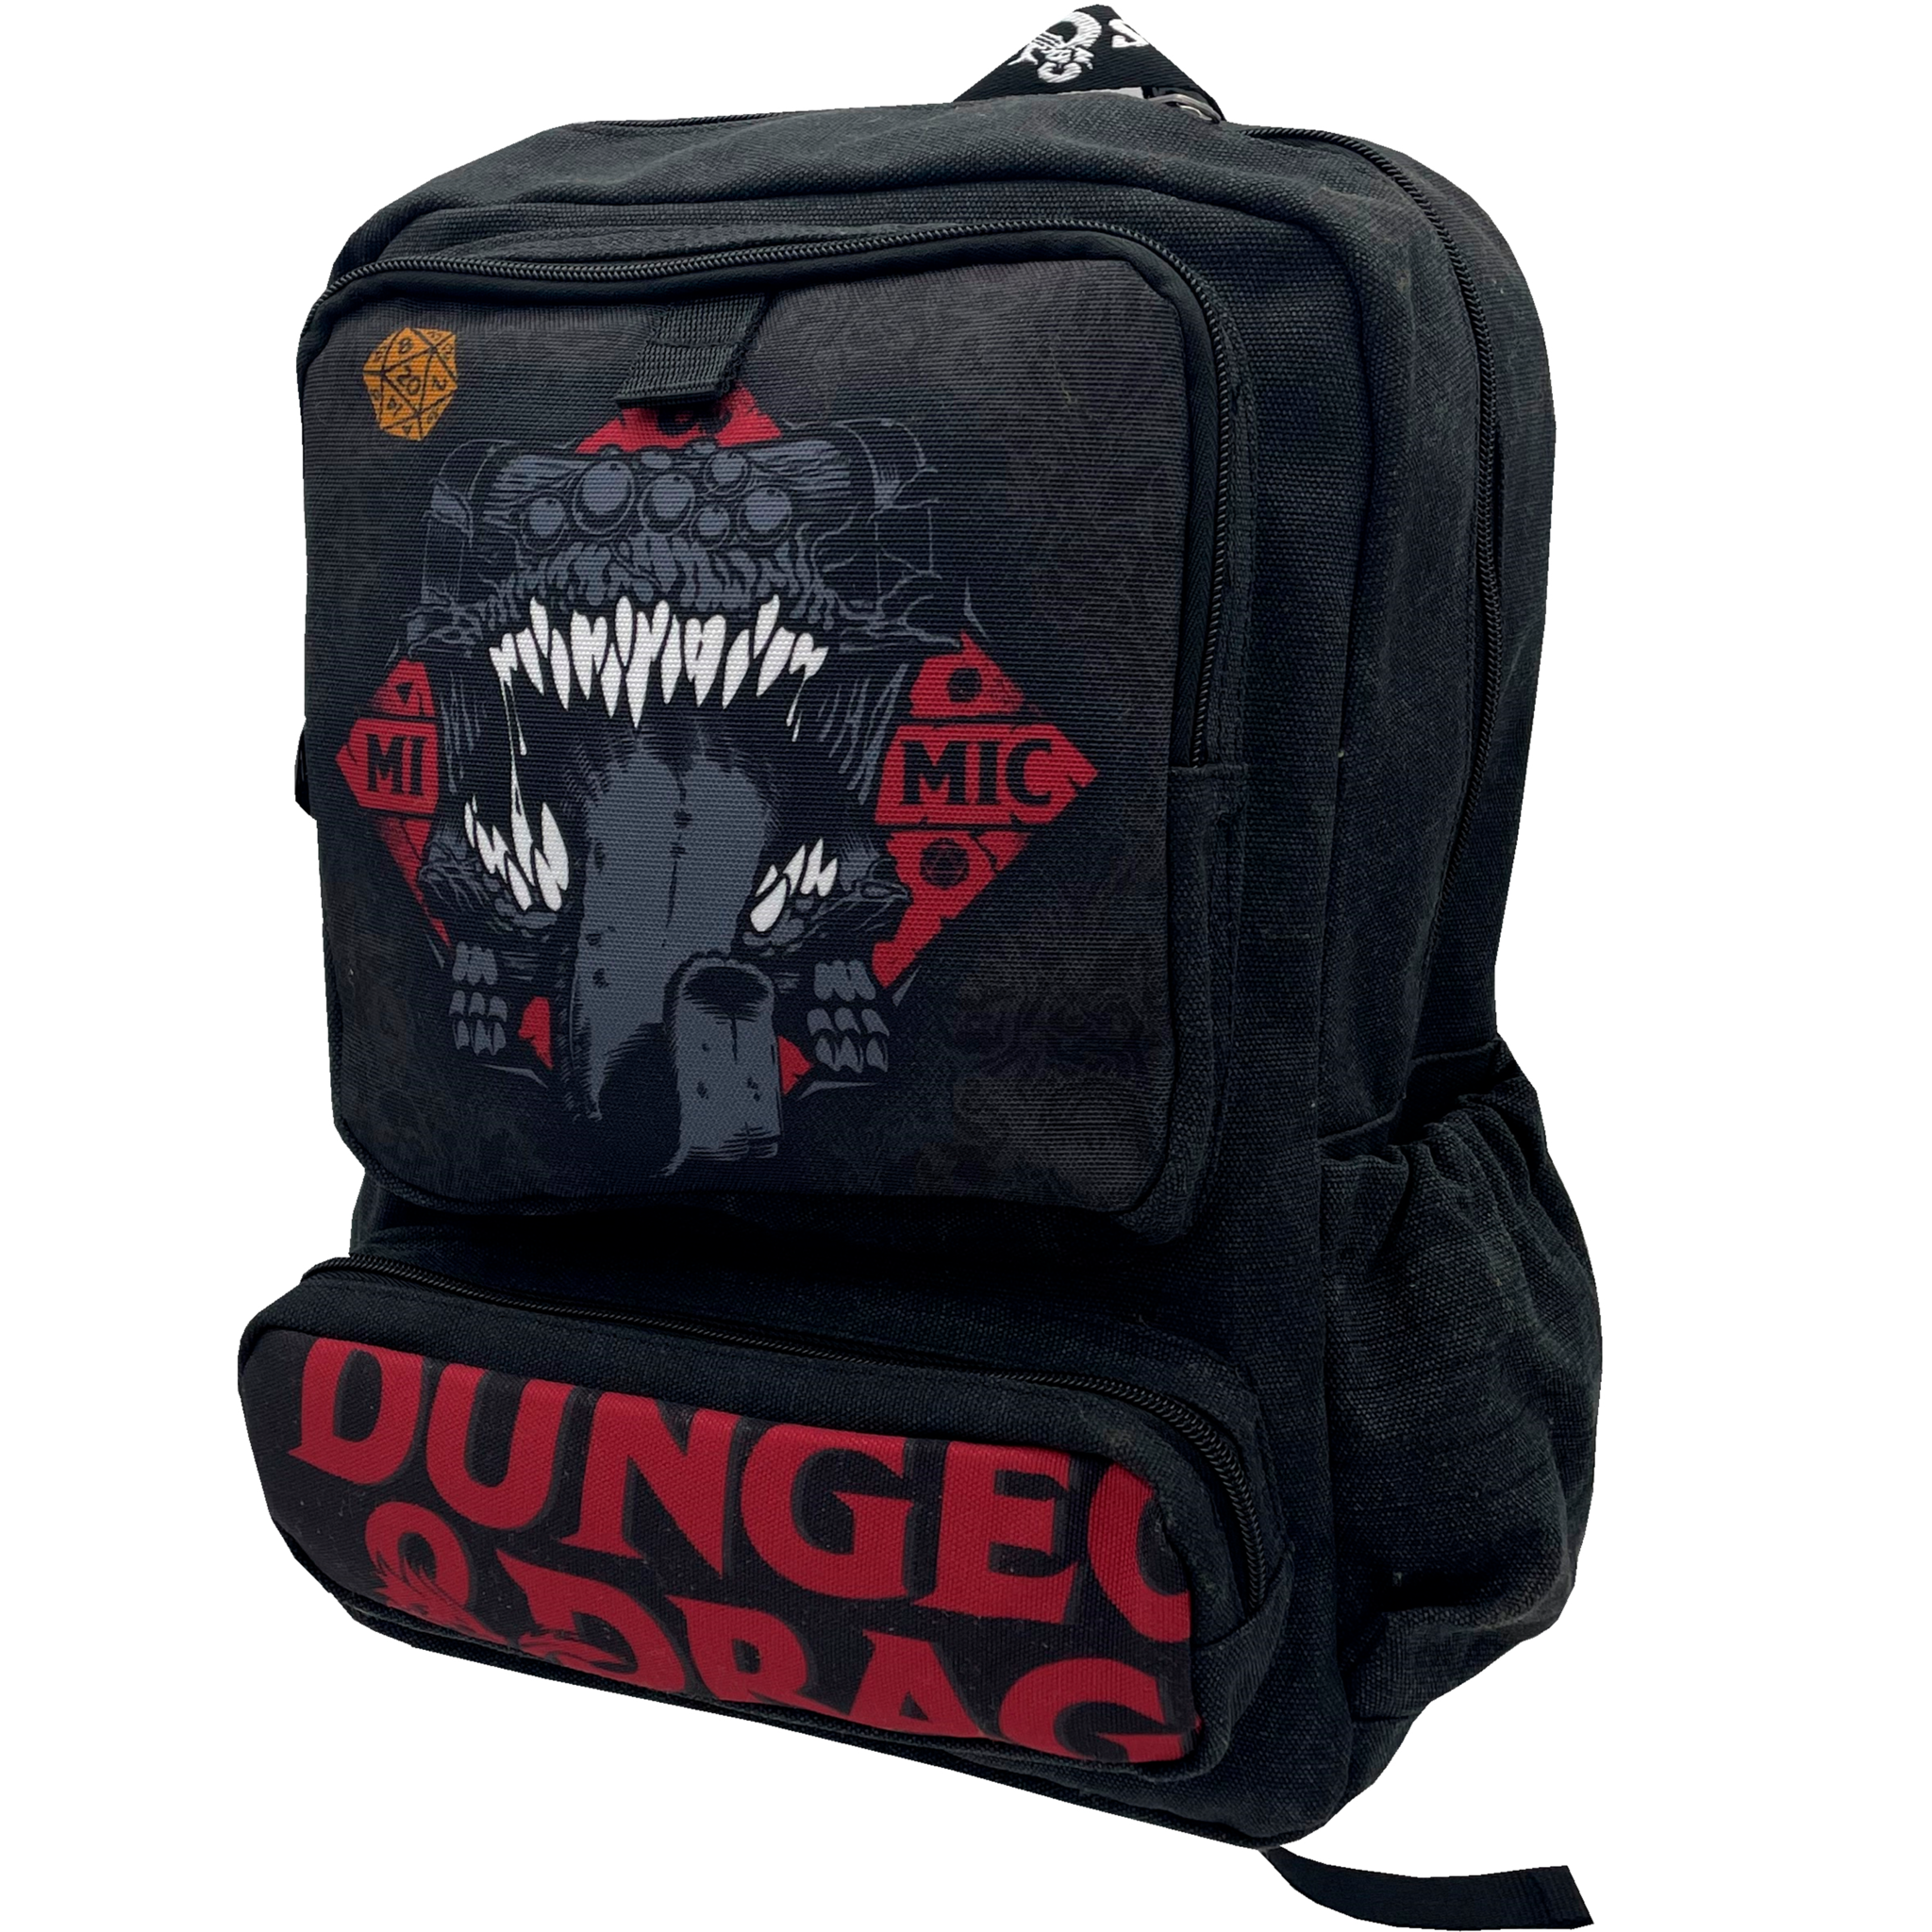 Dungeons & Dragons Backpack, Monsters - 42 x 30 x 11 cm - Cotton / Polyester